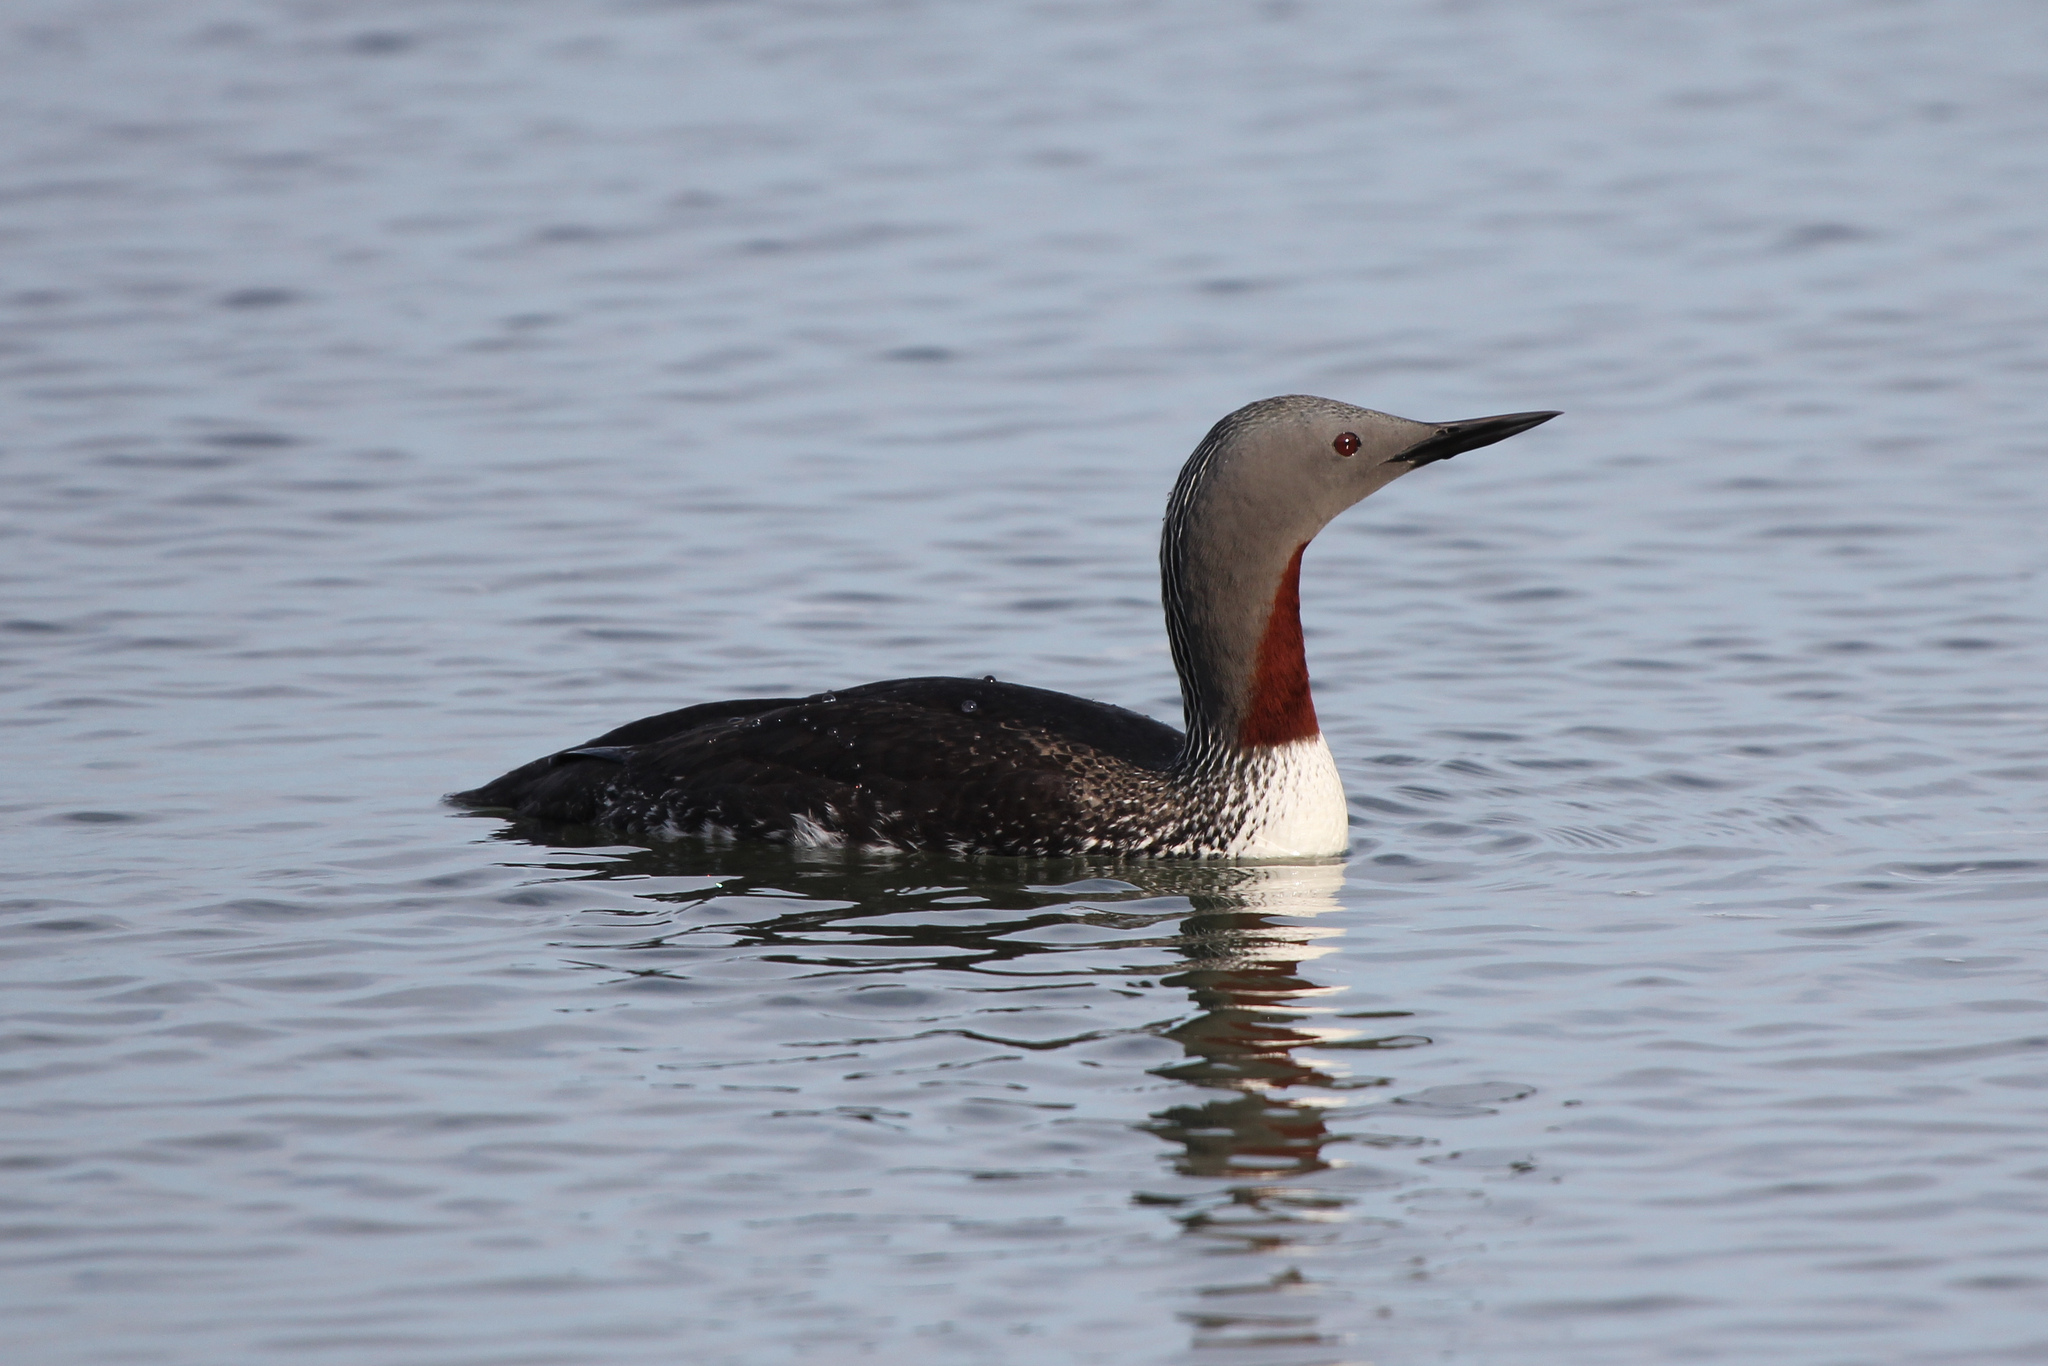 Gavia stellata, Red-throated Loon, Red-throated Diver